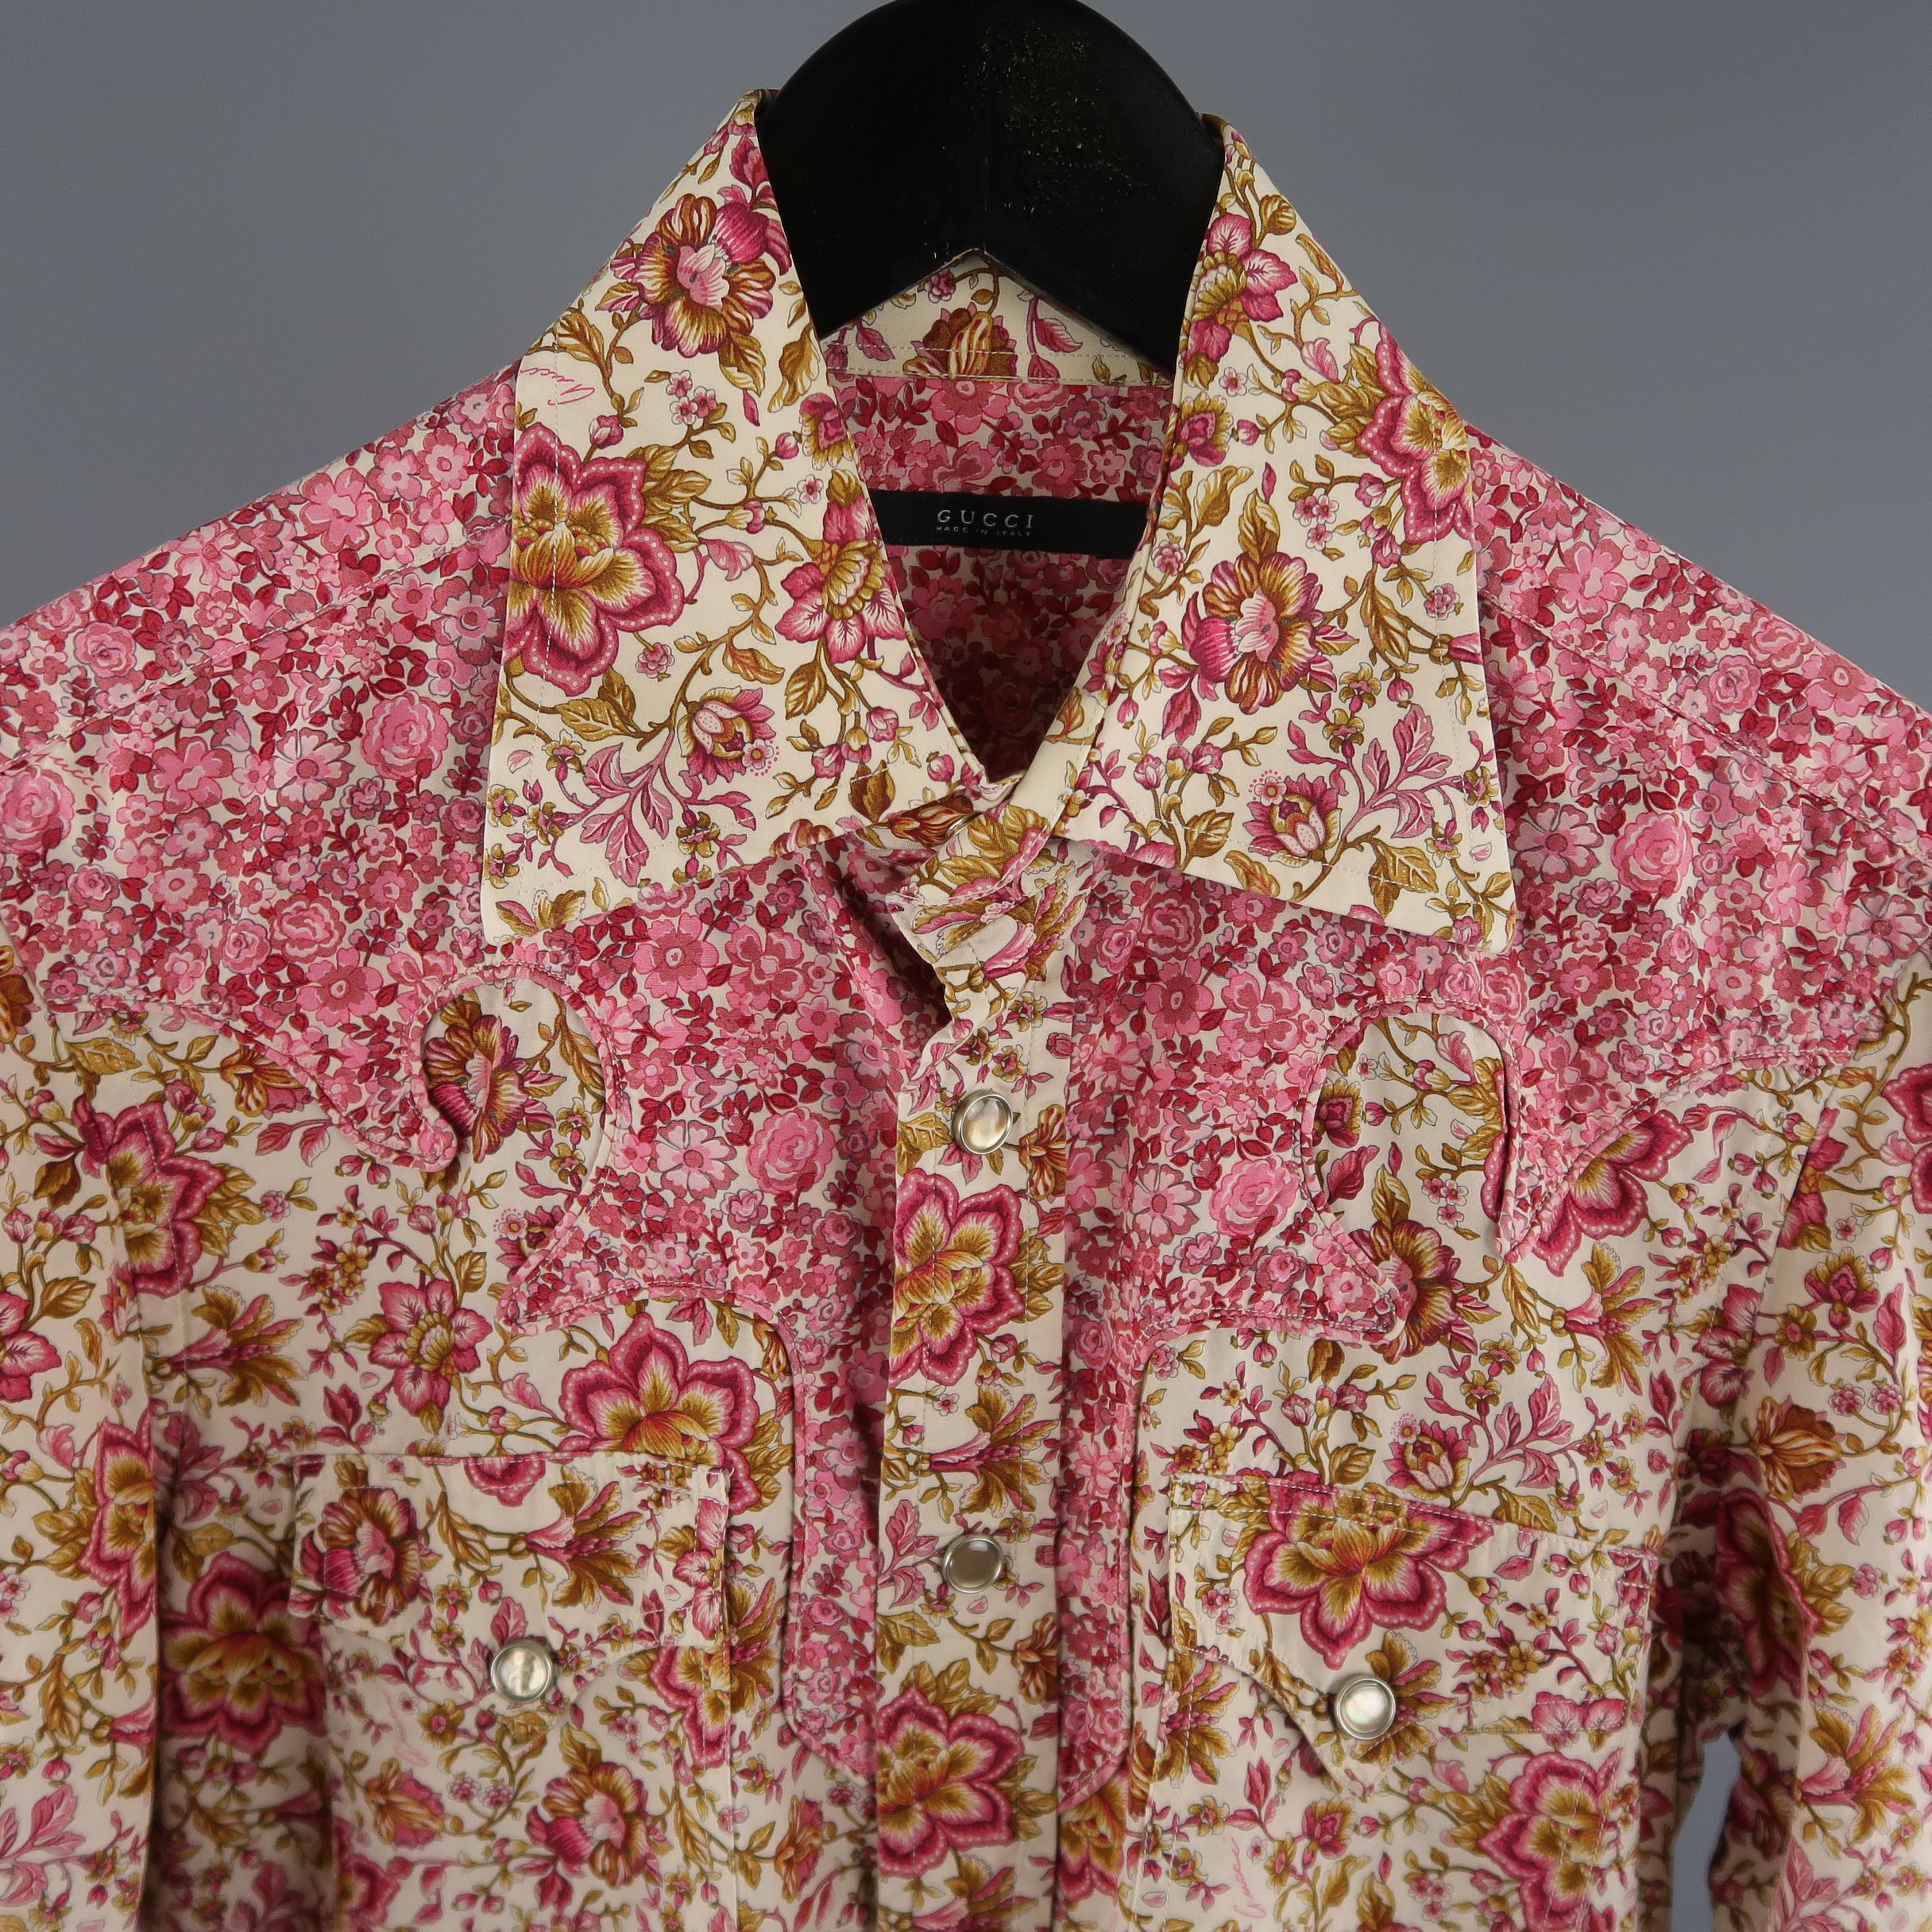 GUCCI by TOM FORD  western shirt come in beige, pink and brown floral cotton, with a pointed collar, snap front, patch flap breast pockets, and western details. Made in Italy.
 
Excellent Pre-Owned Condition.
Marked: 38 IT
 
Measurements:
